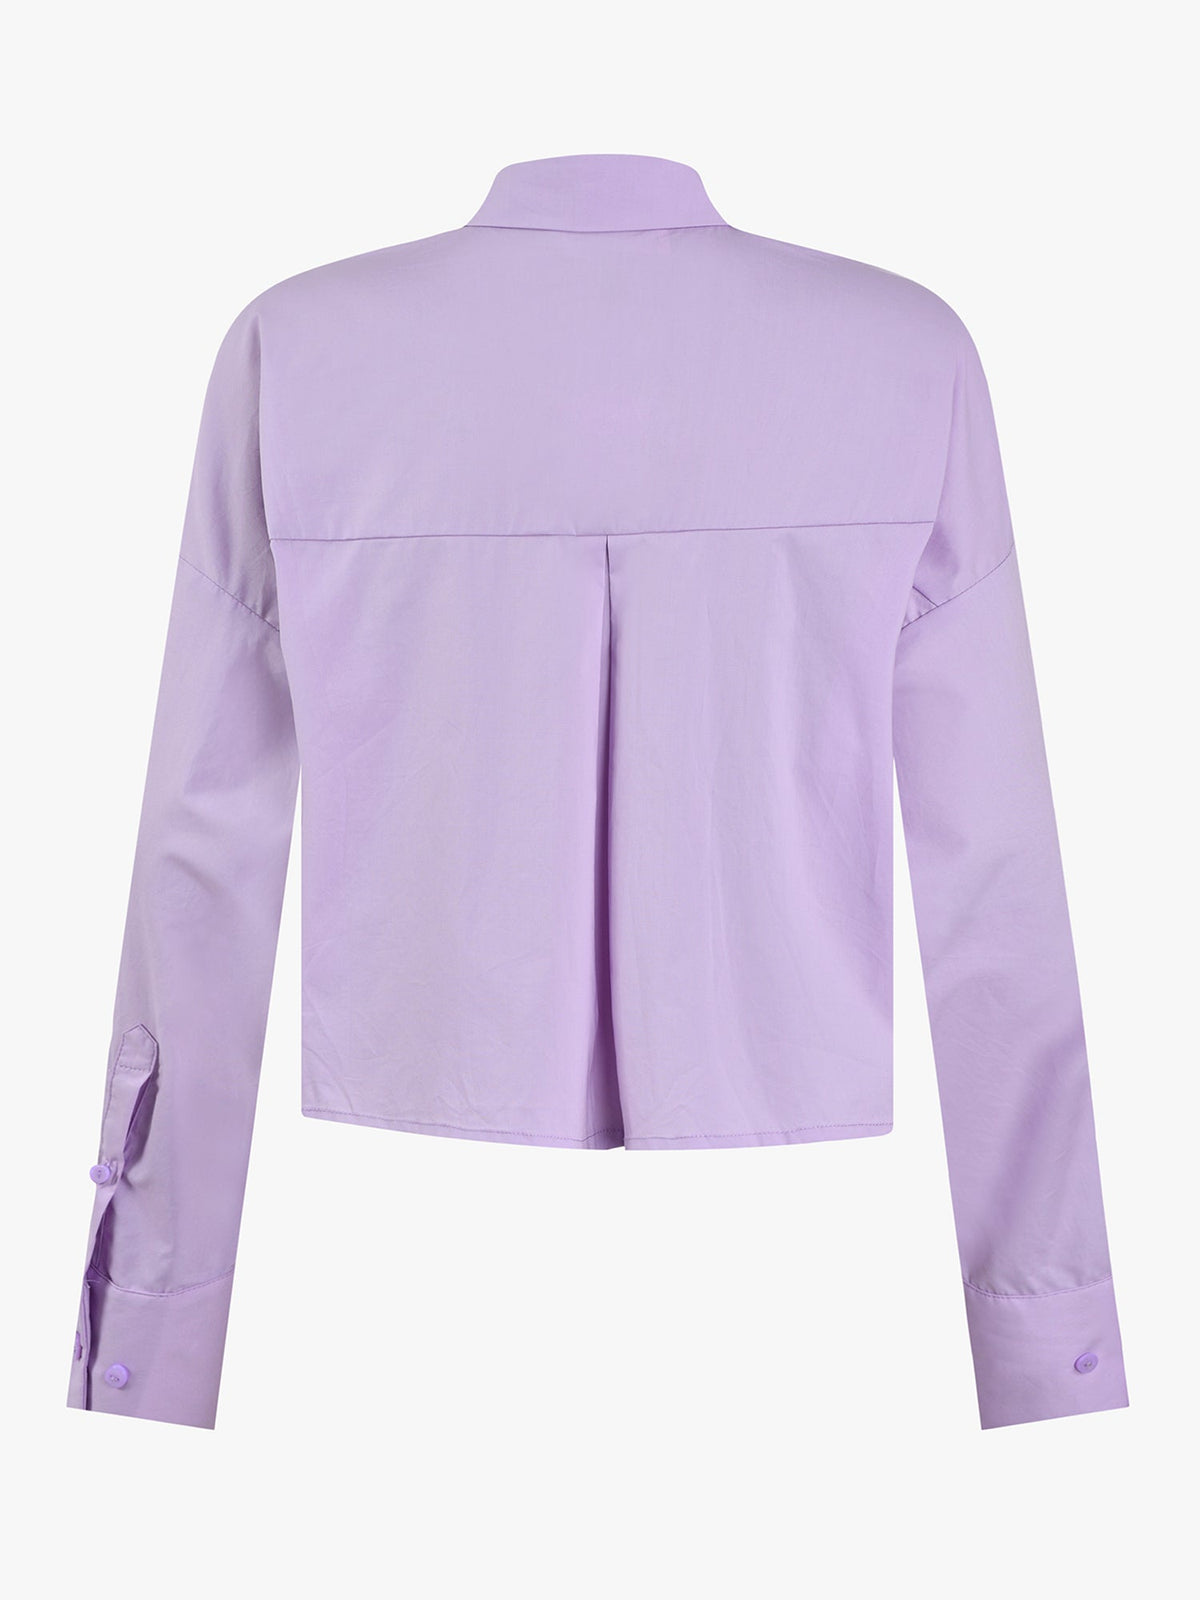 Sofie Schnoor Cropped Buttondown Shirt - Size S Available